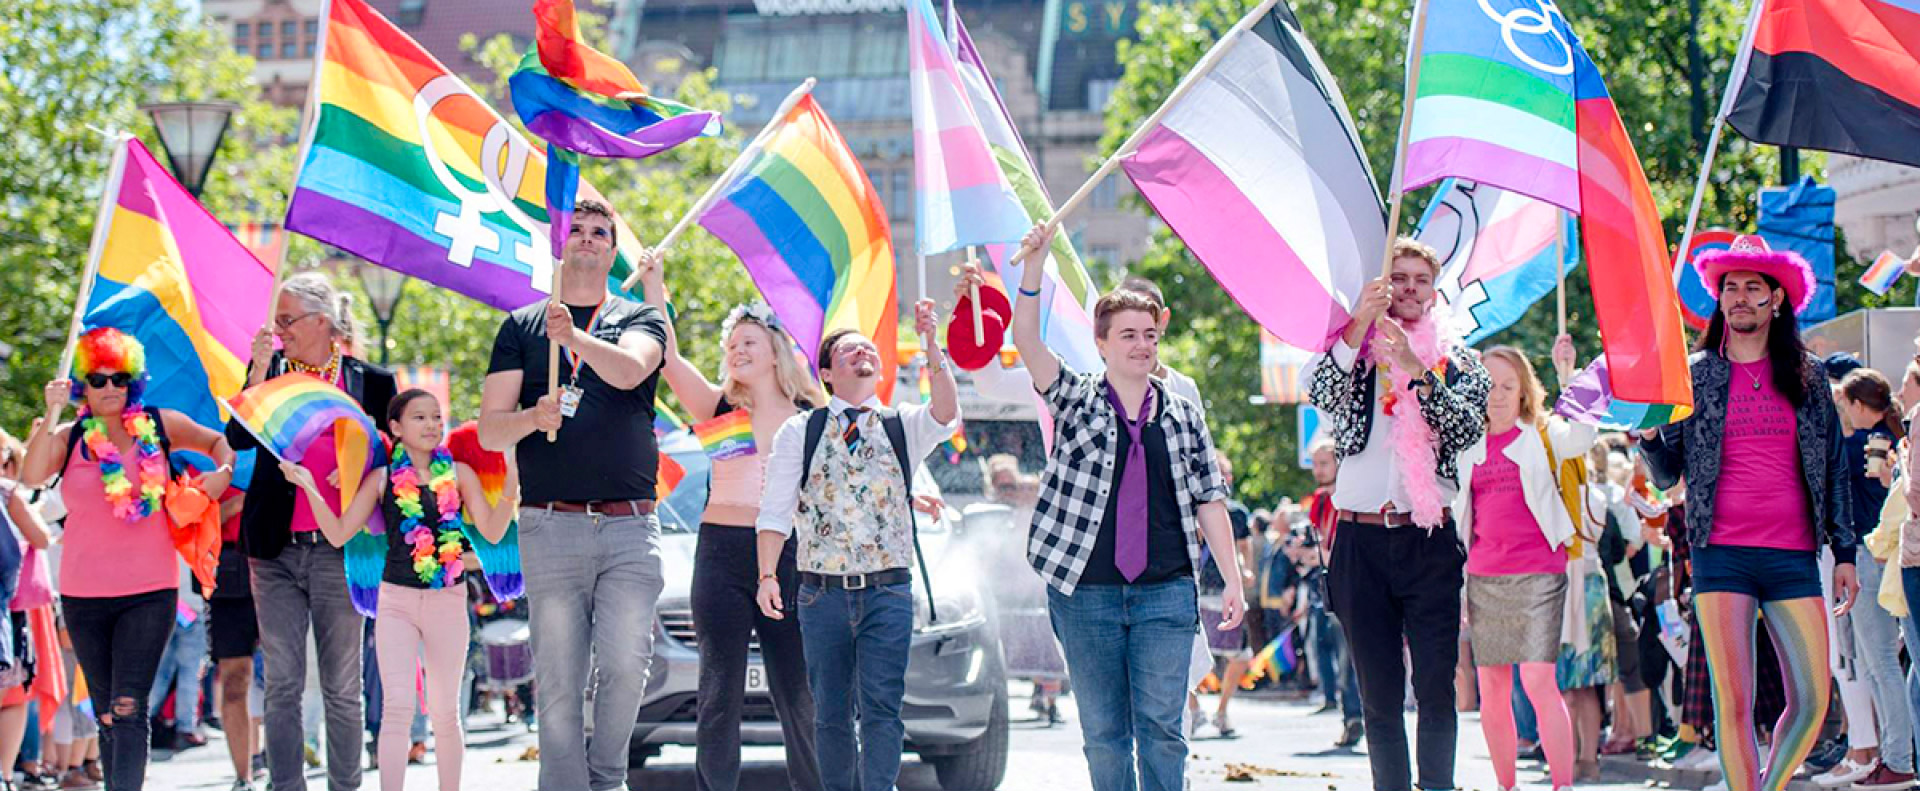 An image of a pride parade